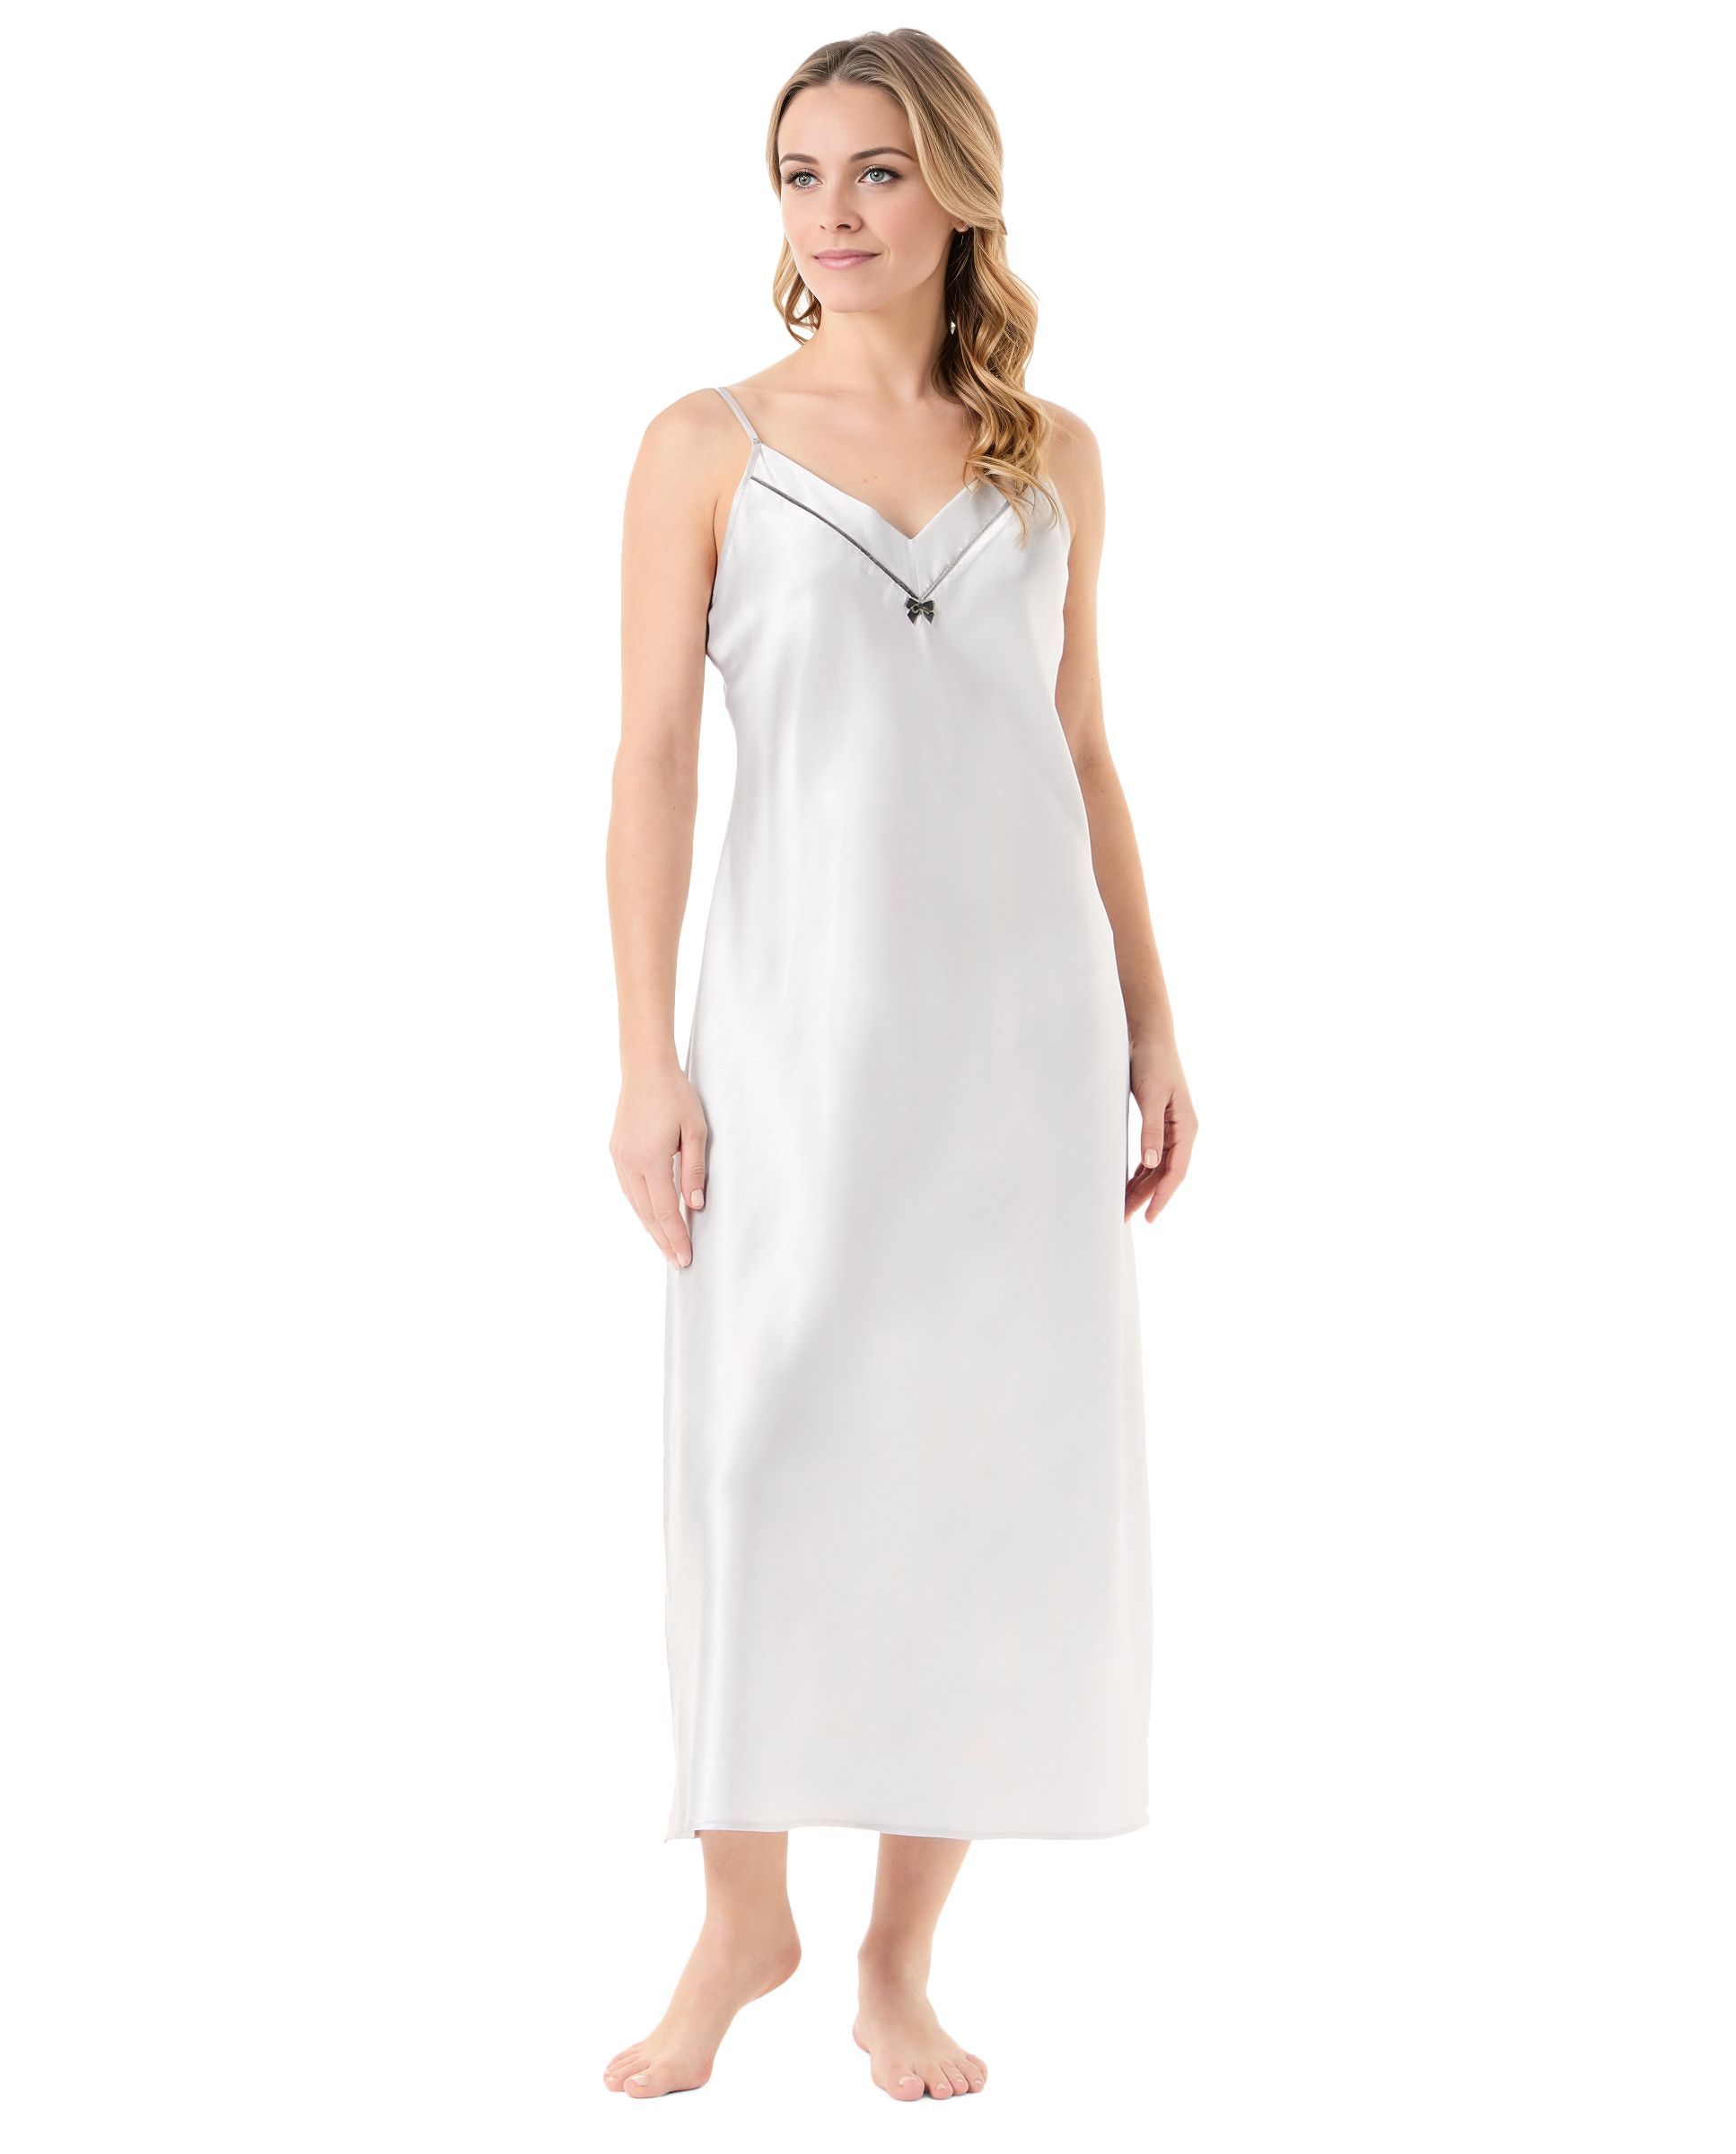 Women's long nightgown with satin straps, Christmas style